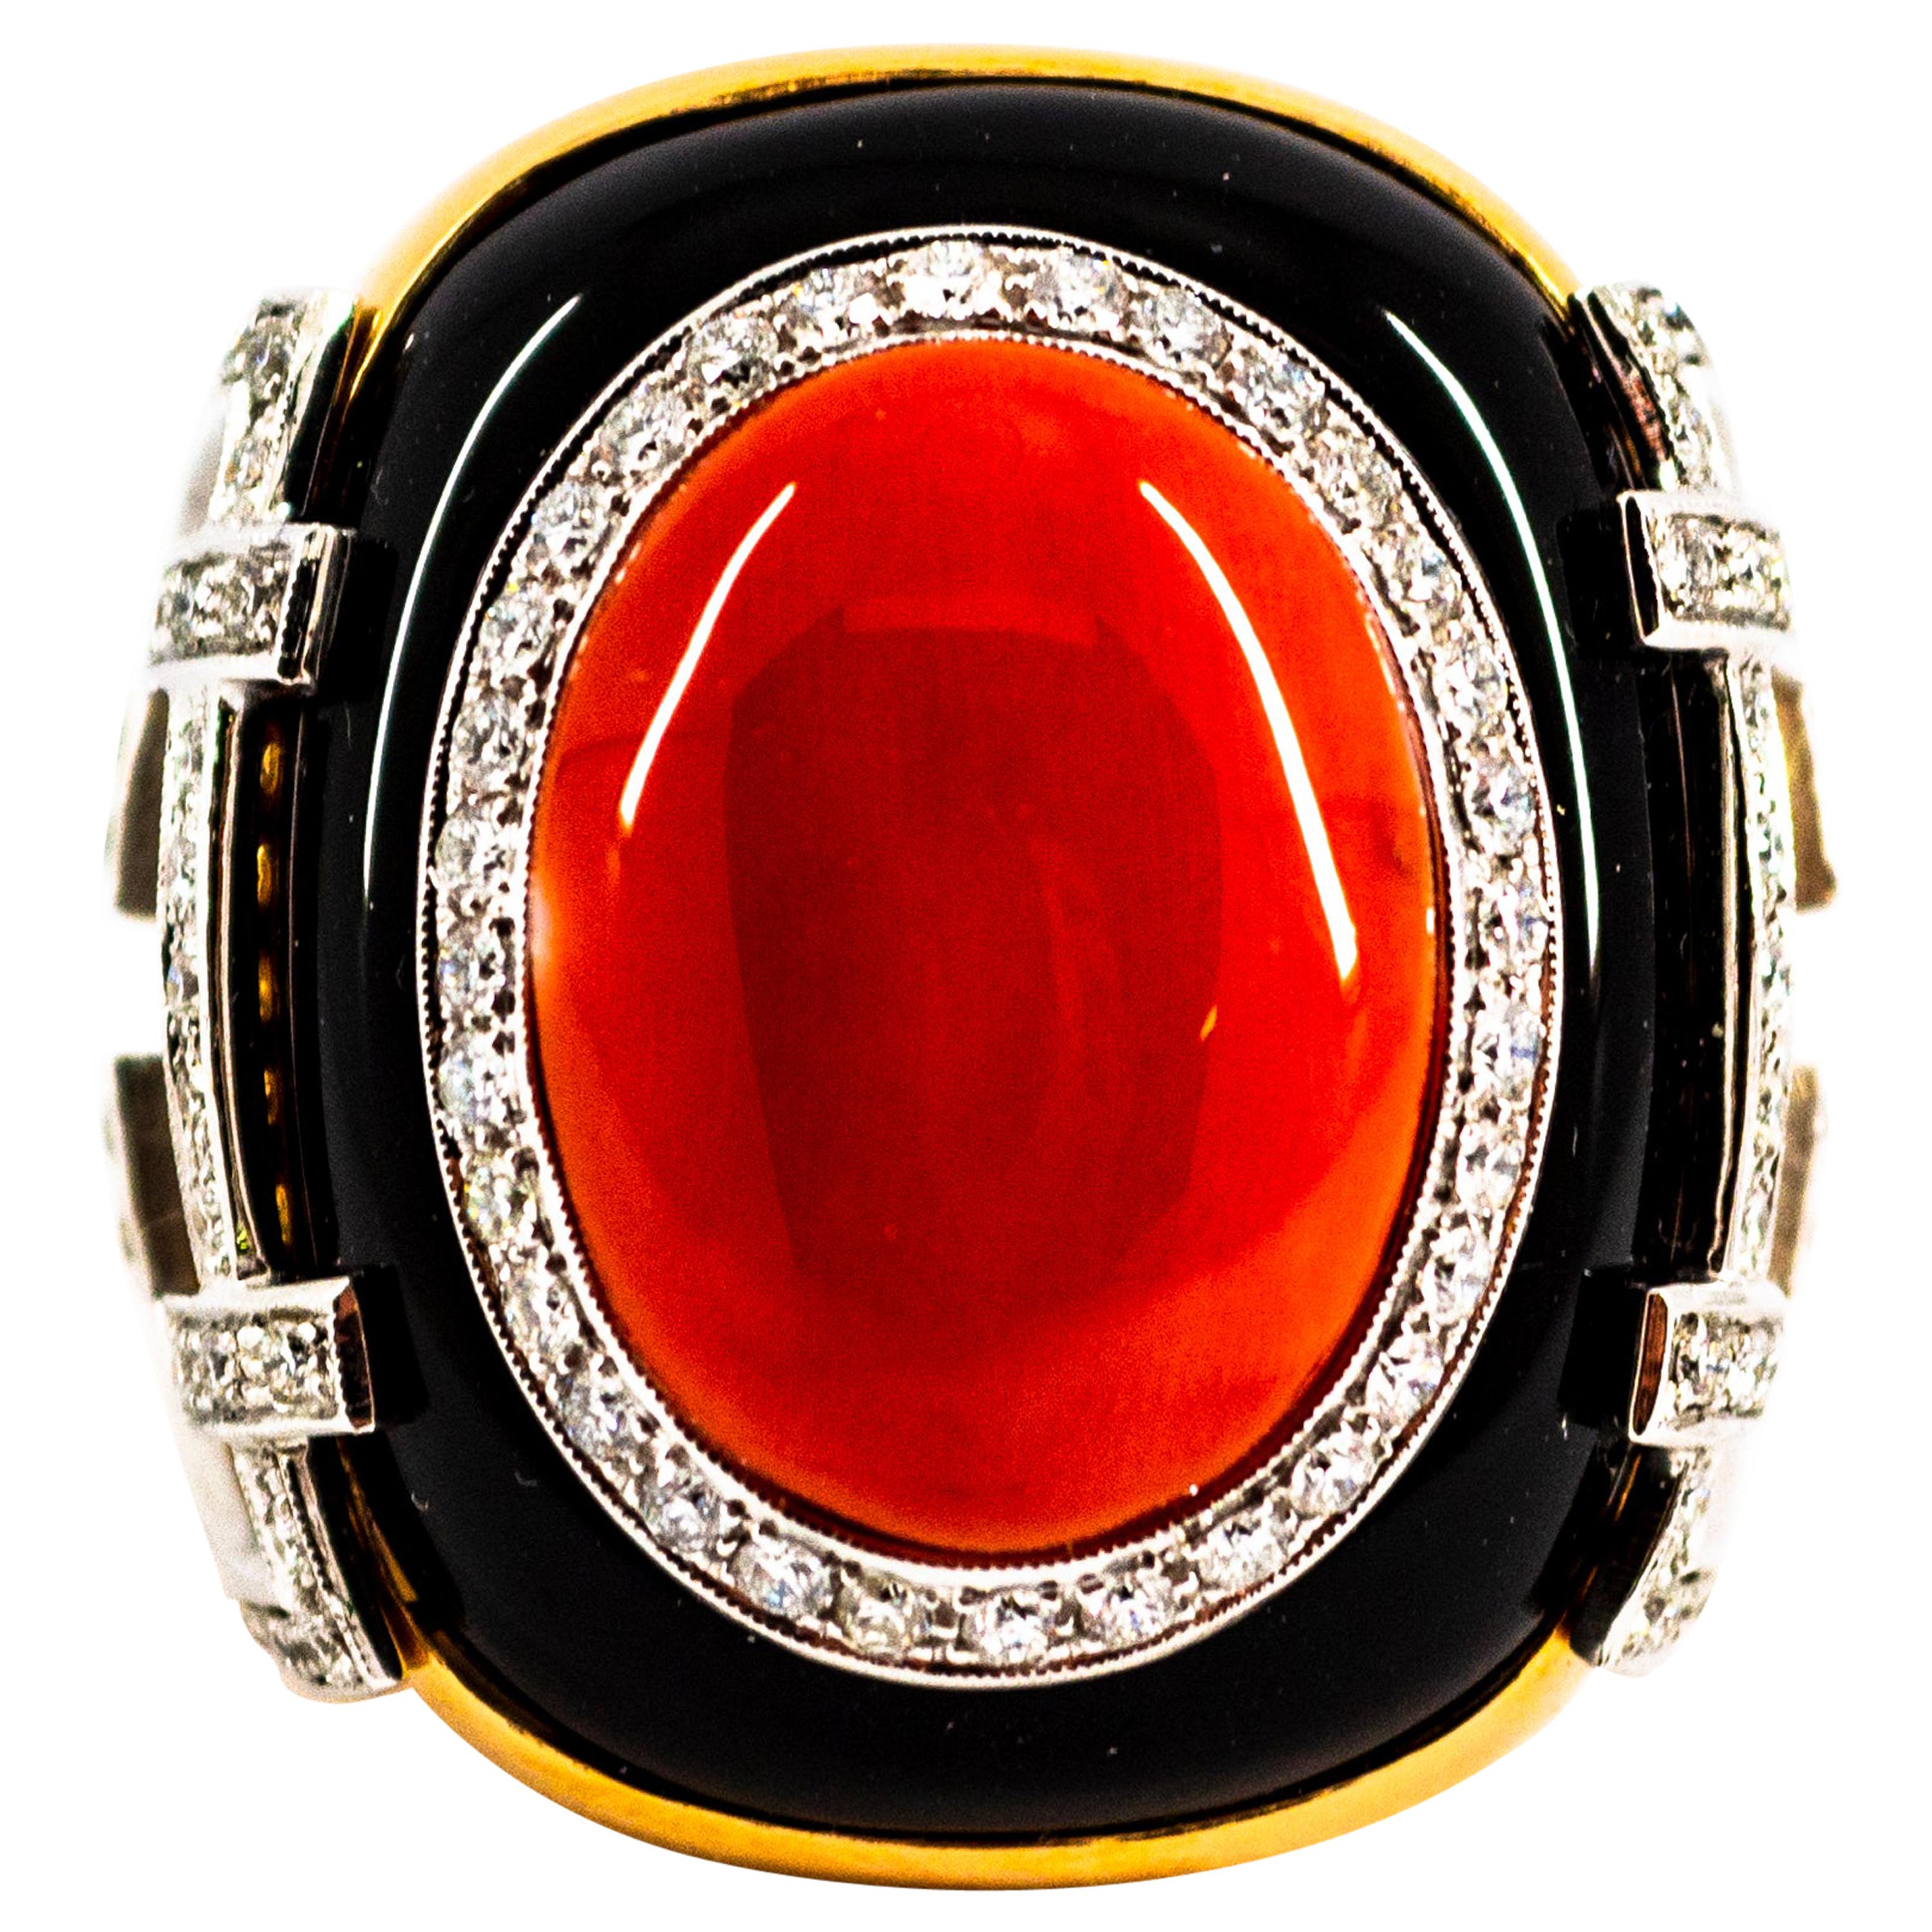 This Ring is made of 14K Yellow Gold.
This Ring has 1.00 Carats of White Brilliant Cut Diamonds.
This Ring has also a Red Mediterranean (Sardinia, Italy) Coral and Onyx.
This Ring is inspired by Art Deco.

This Ring is available also with a central